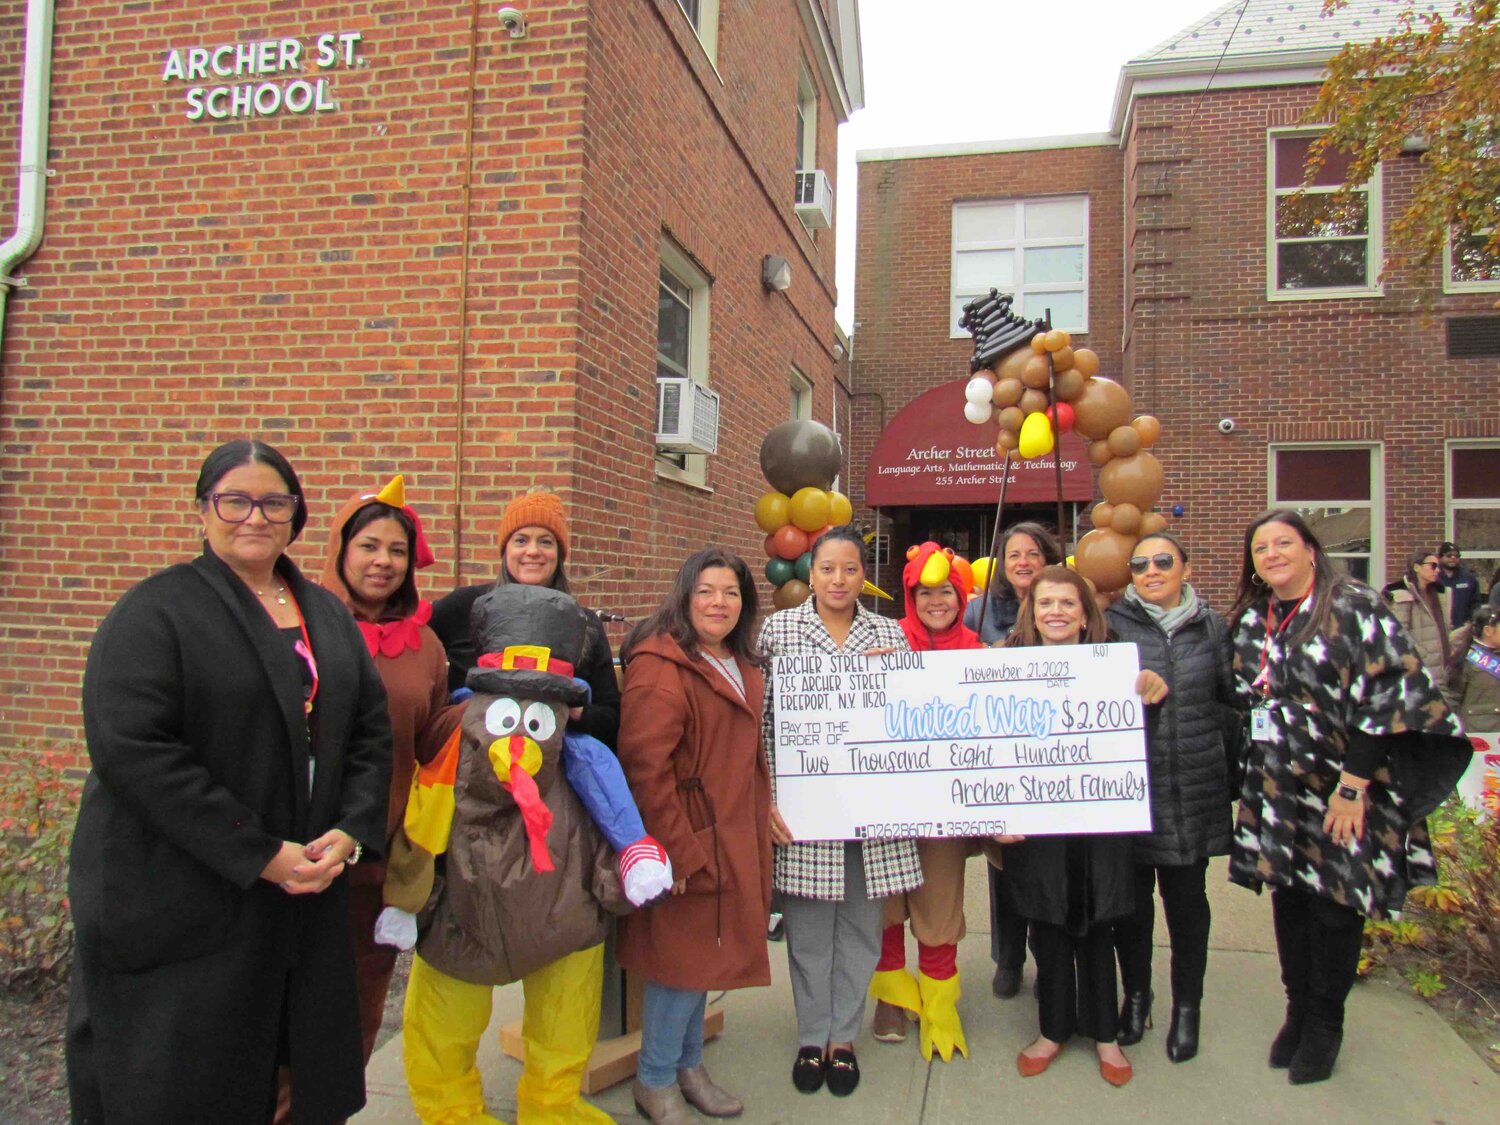 United Way of Long Island Community Impact Director Biena Depenaaccepted a donation from Archer Street School Principal Paula Lein joined by Board of Education President Maria Jordan-Awalom, Board trustee Sonia A. Dixon, Assistant Superintendent for Educational and Administrative Services Dr. Helen Kanellooulos, Assistant Superintendent for Curriculum and Instruction Glori Engel and staff.